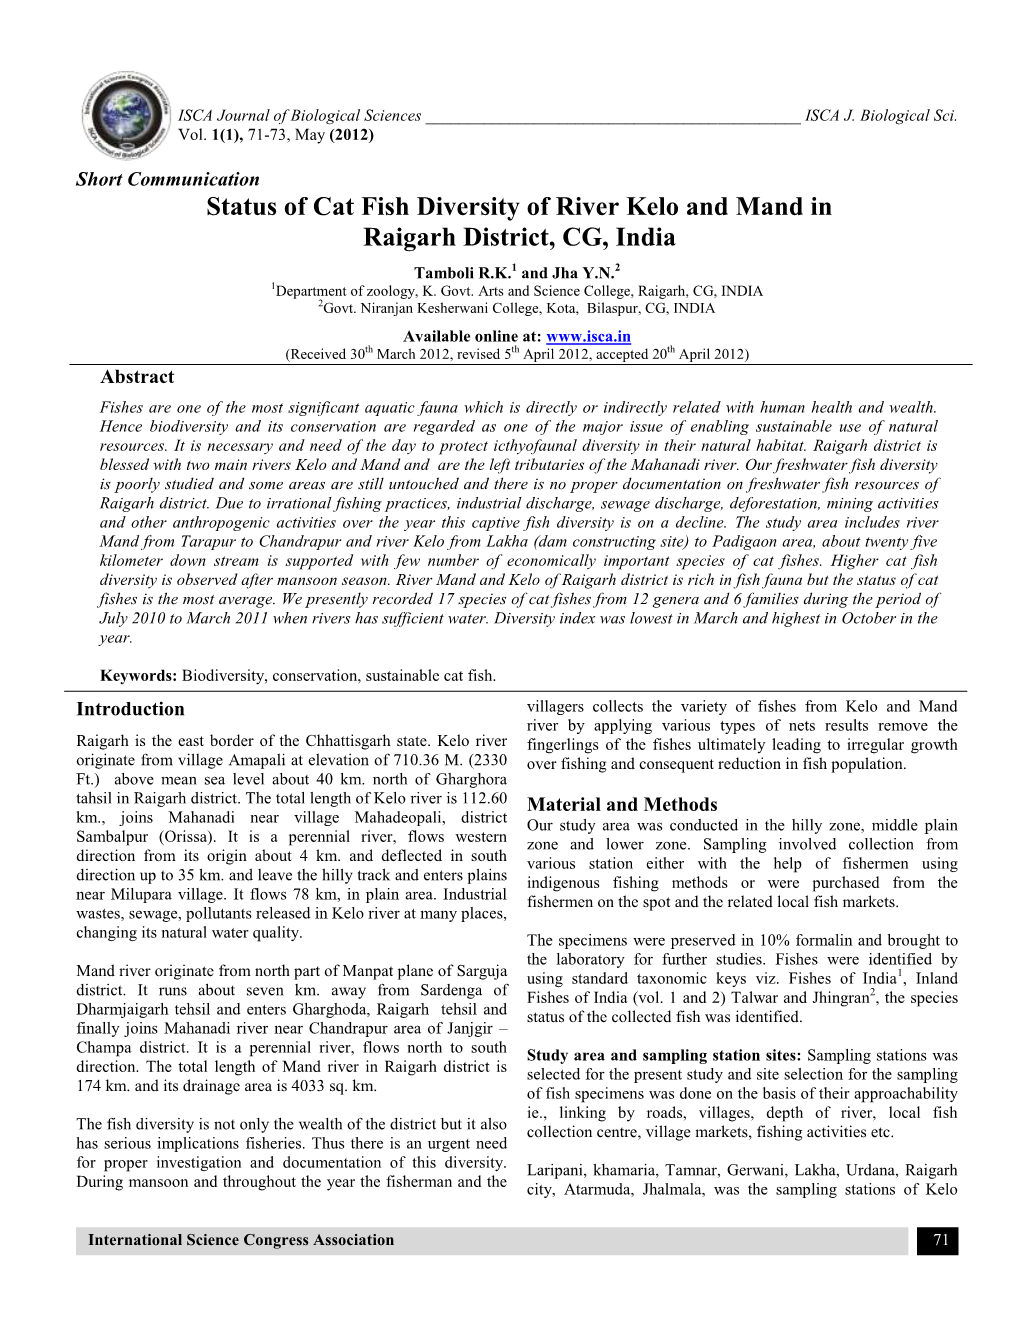 Status of Cat Fish Diversity of River Kelo and Mand in Raigarh District, CG, India